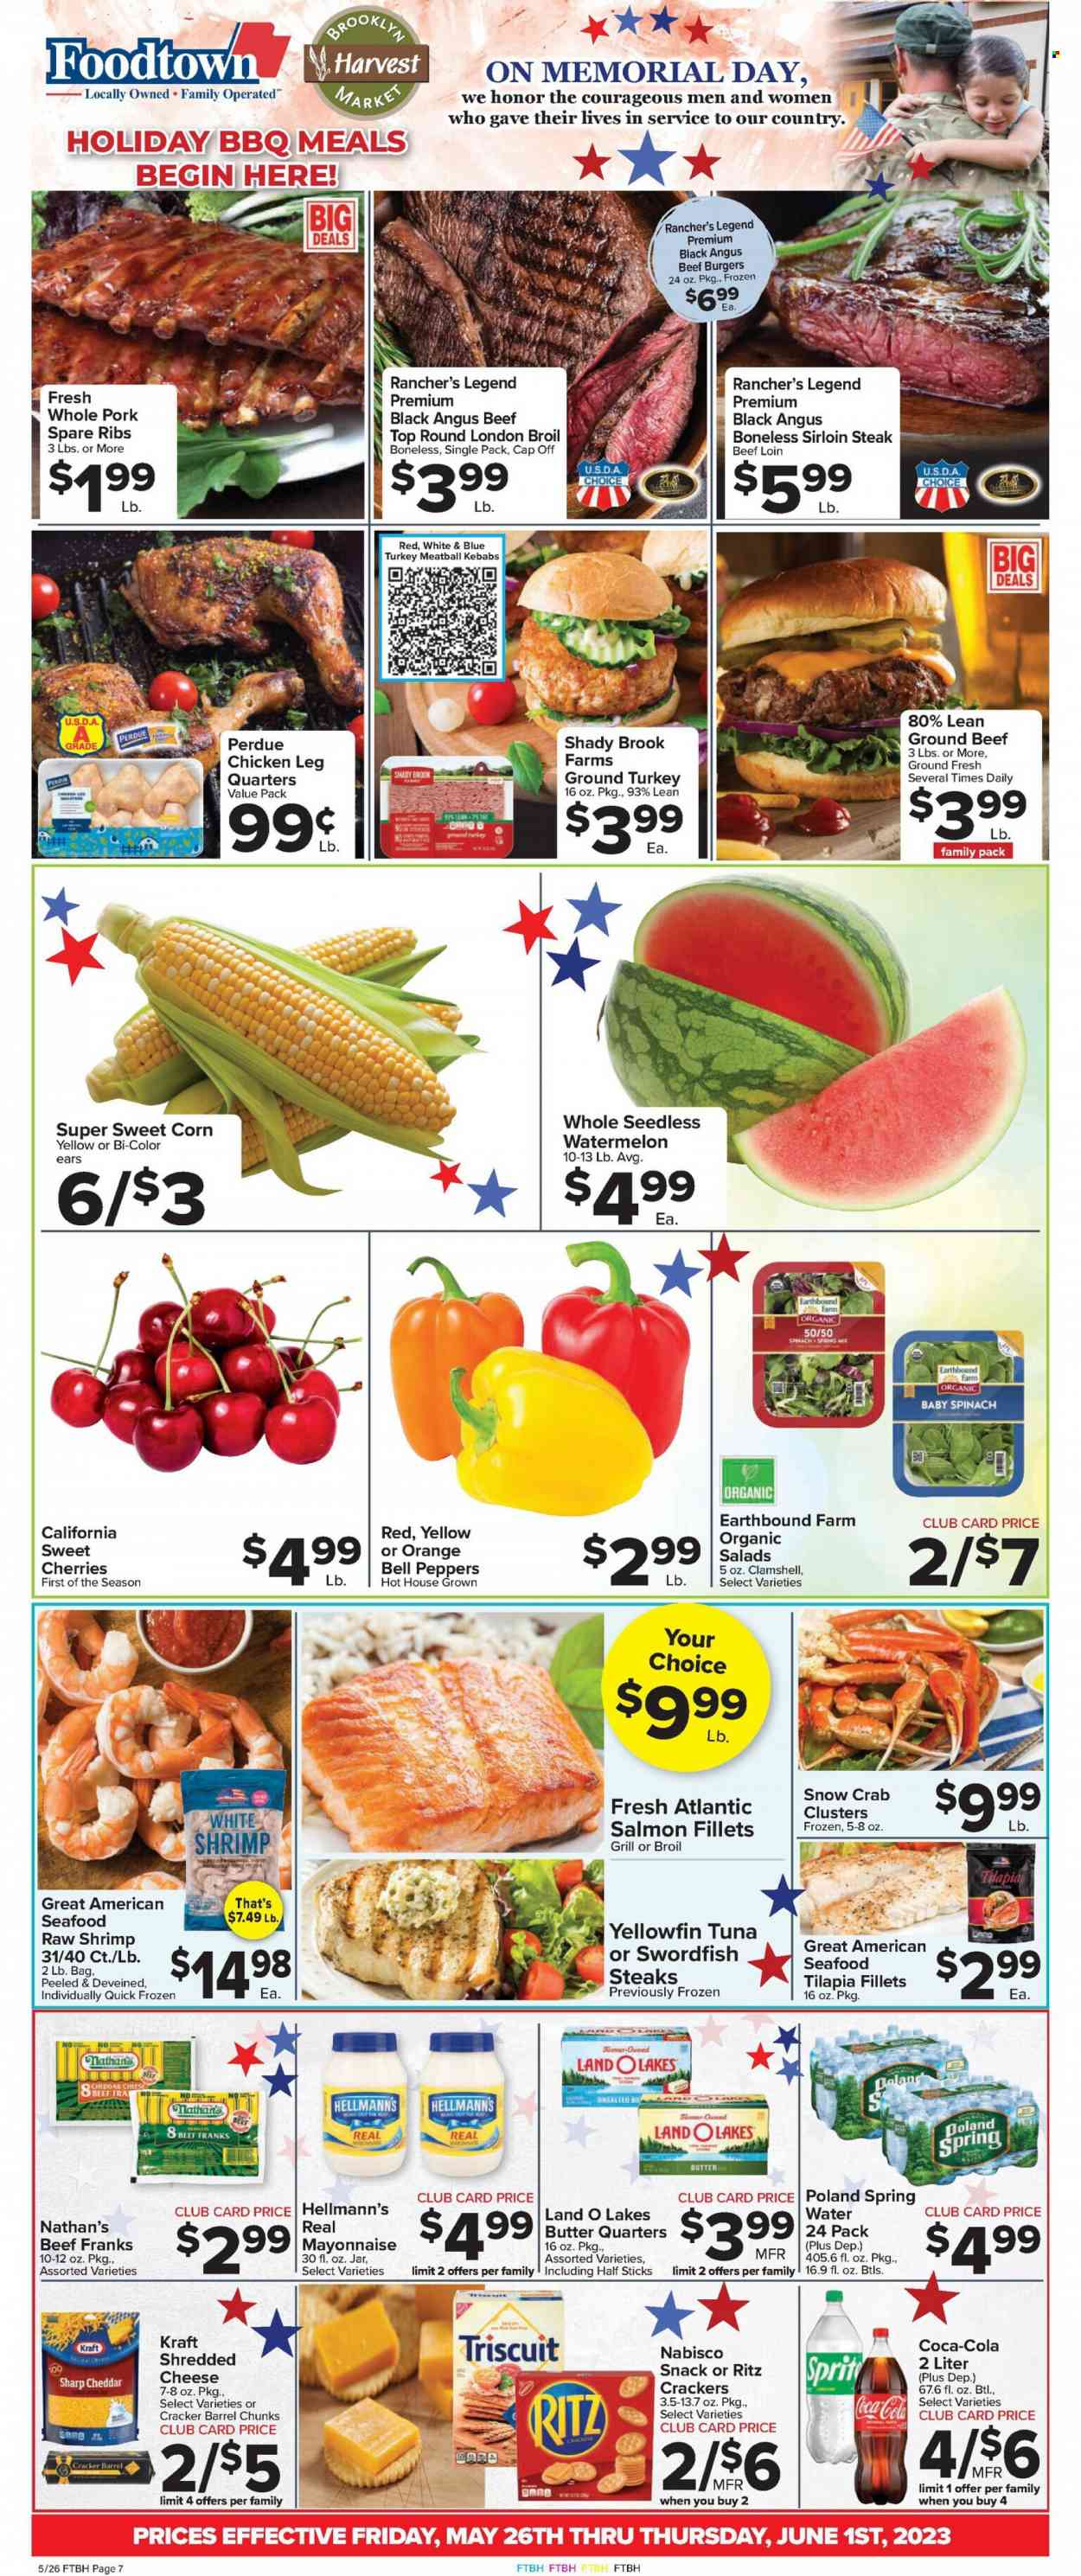 thumbnail - Foodtown Flyer - 05/26/2023 - 06/01/2023 - Sales products - bell peppers, corn, spinach, salad, peppers, sweet corn, watermelon, cherries, salmon, salmon fillet, swordfish, tilapia, tuna, seafood, crab, shrimps, crab clusters, hamburger, beef burger, Perdue®, Kraft®, ready meal, snack, frankfurters, shredded cheese, cheddar, mayonnaise, Hellmann’s, crackers, RITZ, Nabisco, Coca-Cola, soft drink, water, beer, ground turkey, chicken legs, turkey, beef meat, beef sirloin, ground beef, steak, sirloin steak, ribs, pork meat, pork ribs, pork spare ribs. Page 1.